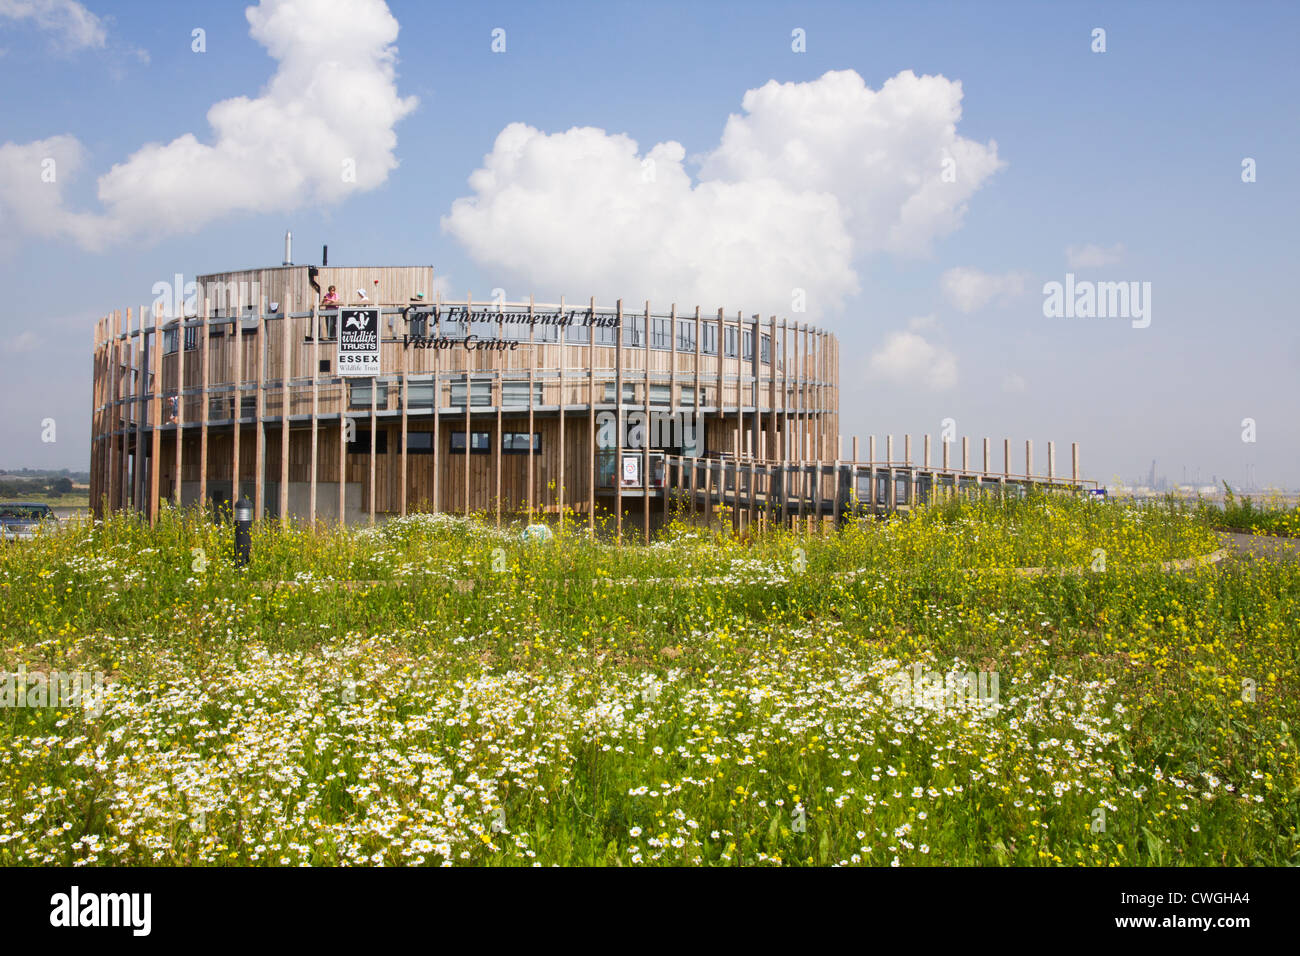 Cory Environment Centre,Visitor center, Thameside Nature Park, Mucking,Thurrock, Essex Stock Photo